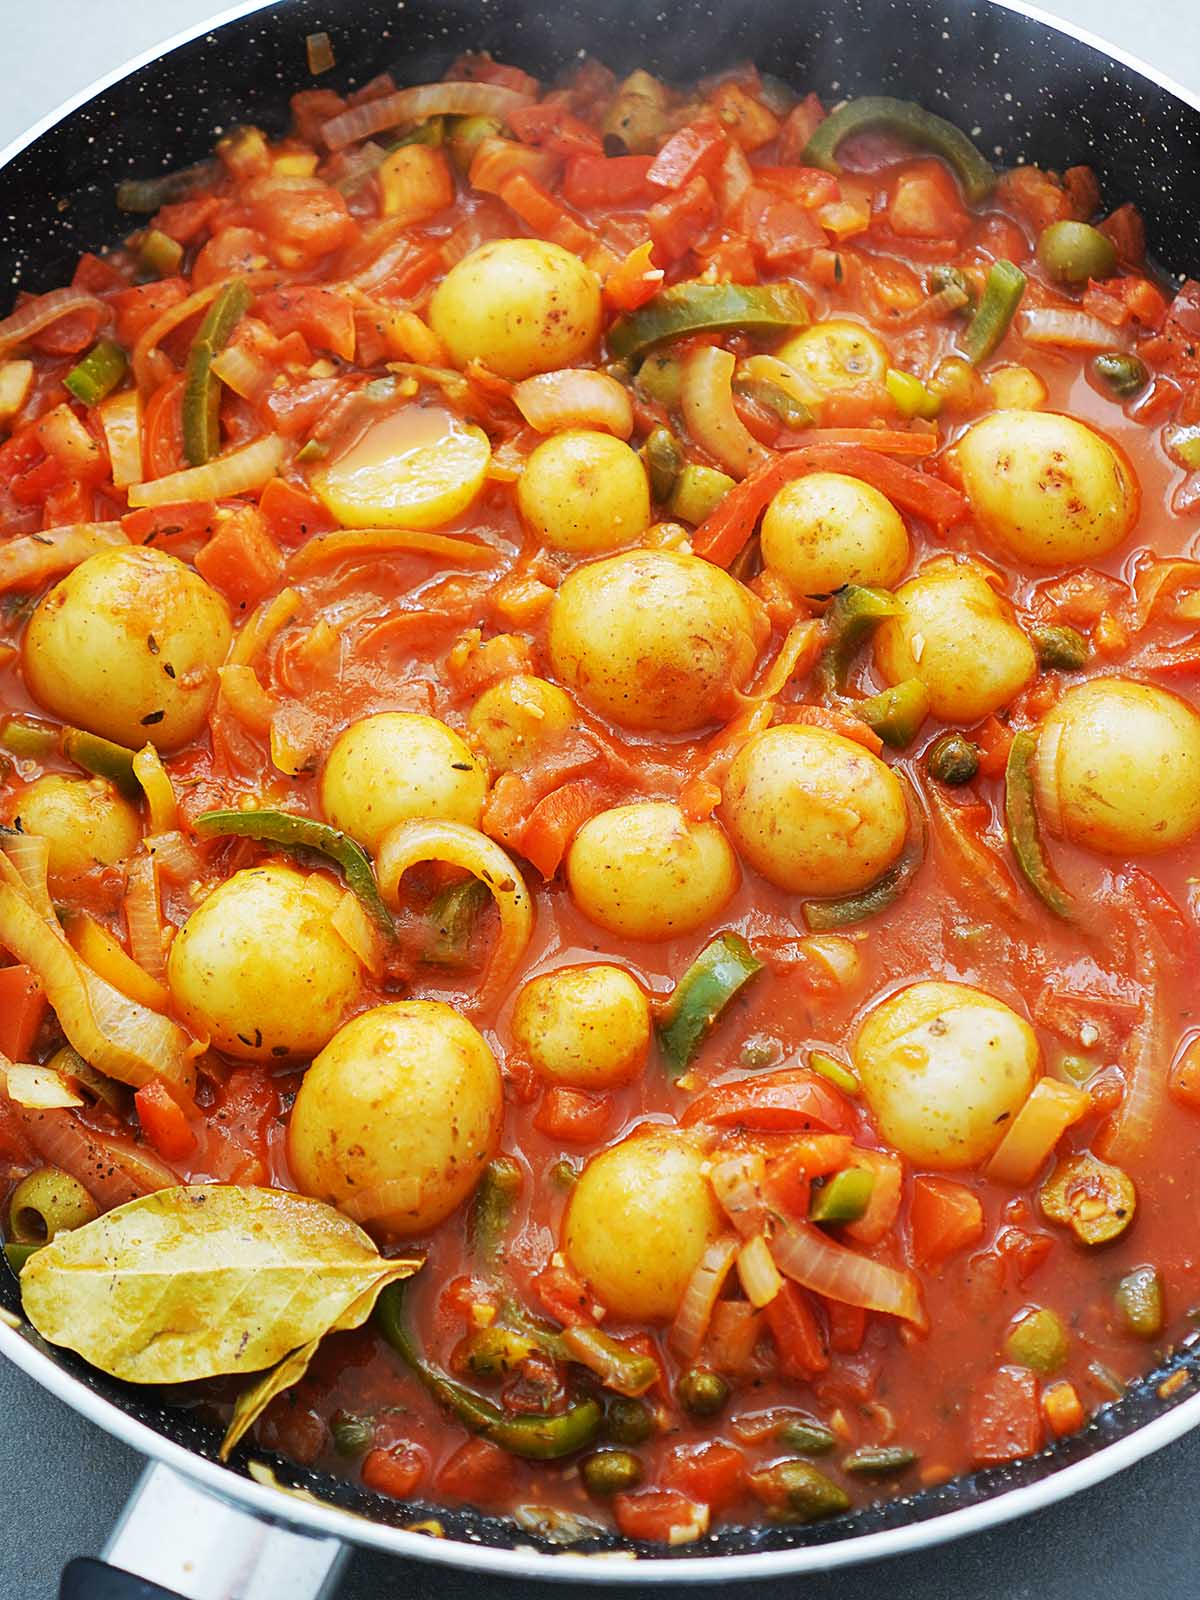 A large skillet with tomato sauce, onions, peppers and potatoes.